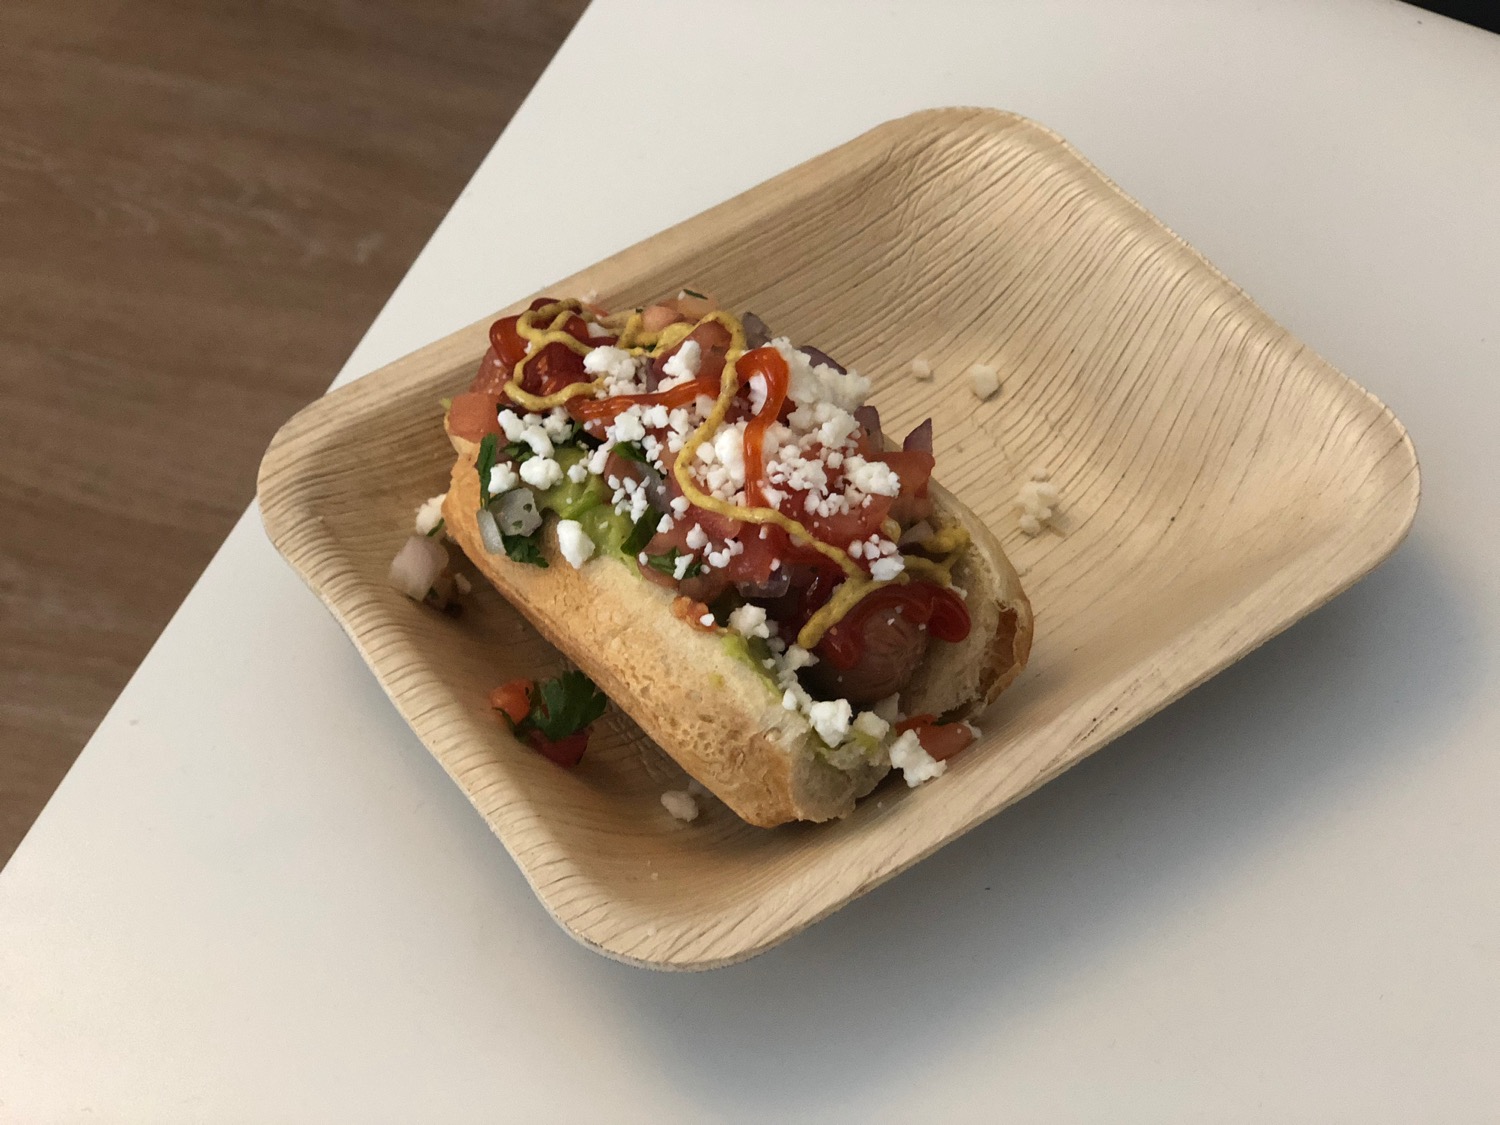 a hot dog with toppings on a wooden plate